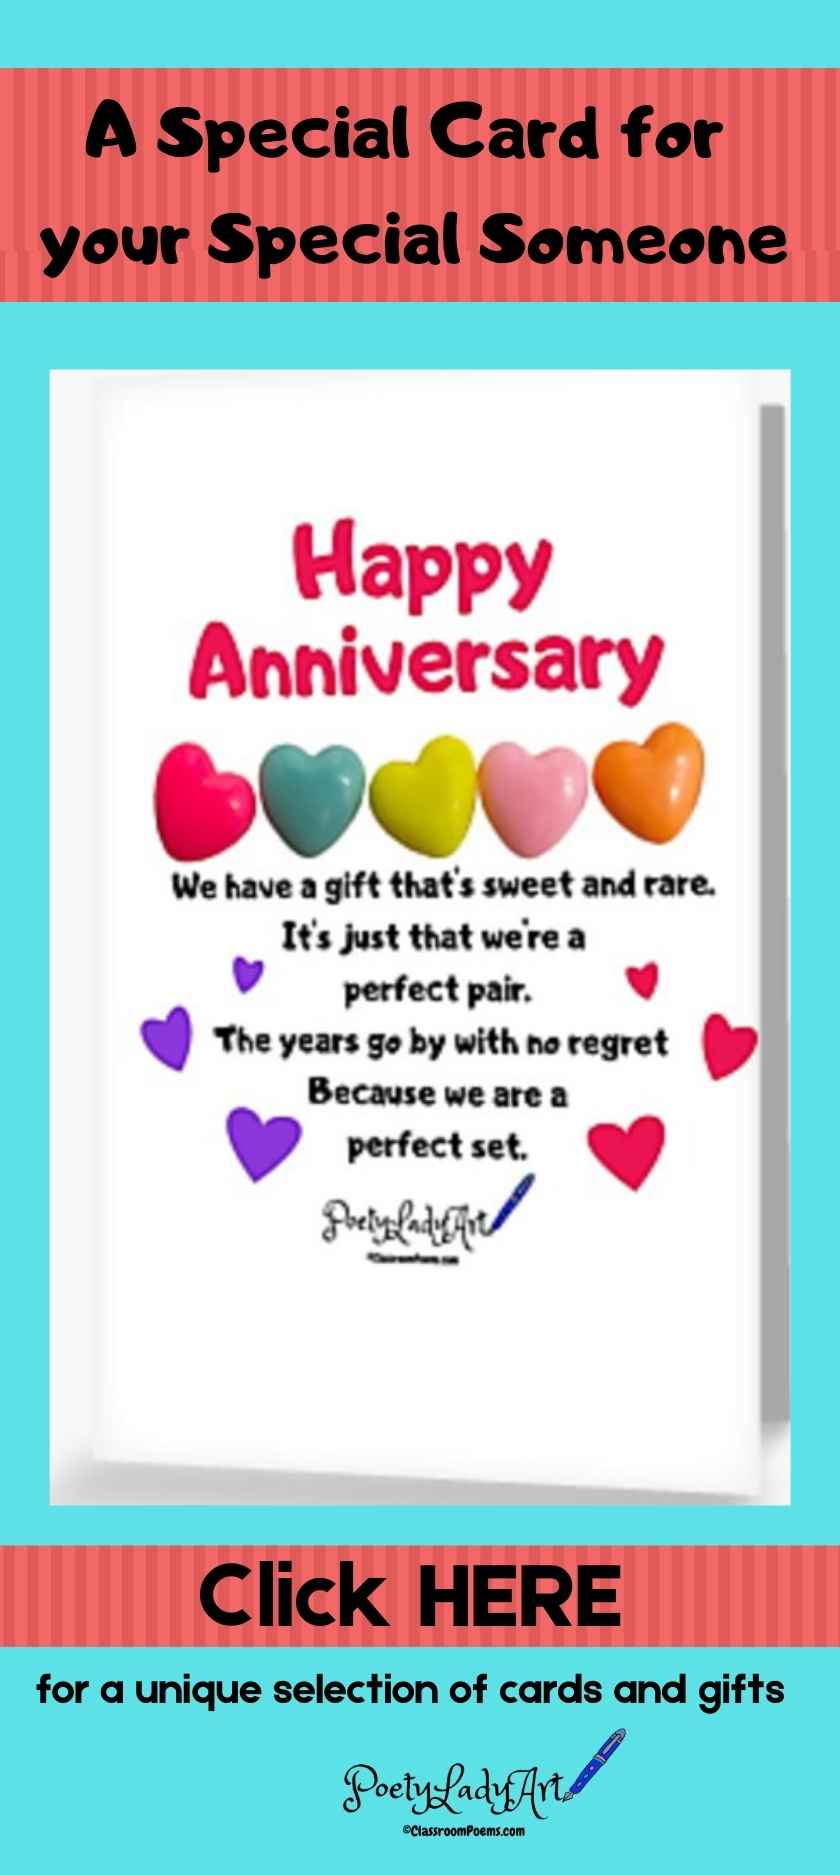 anniversary gifts,
anniversary gifts for him,
anniversary gifts for her,
ideas for anniversary gifts,
anniversary gifts ideas,
anniversary gifts husband,
anniversary gifts wife,